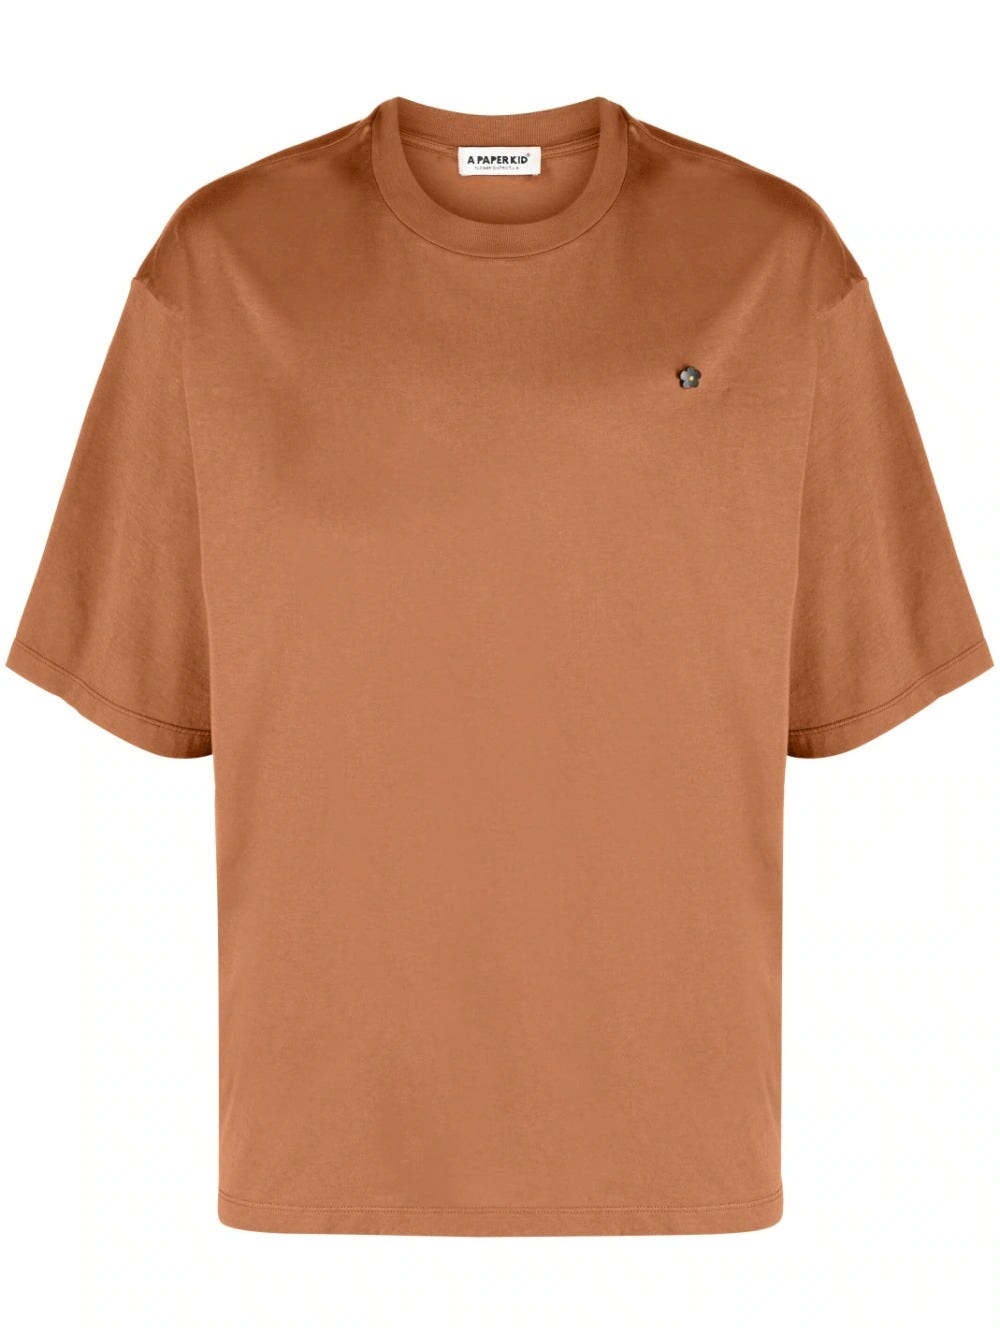 A PAPER KID BROWN T-SHIRT WITH APPLIQUÉ